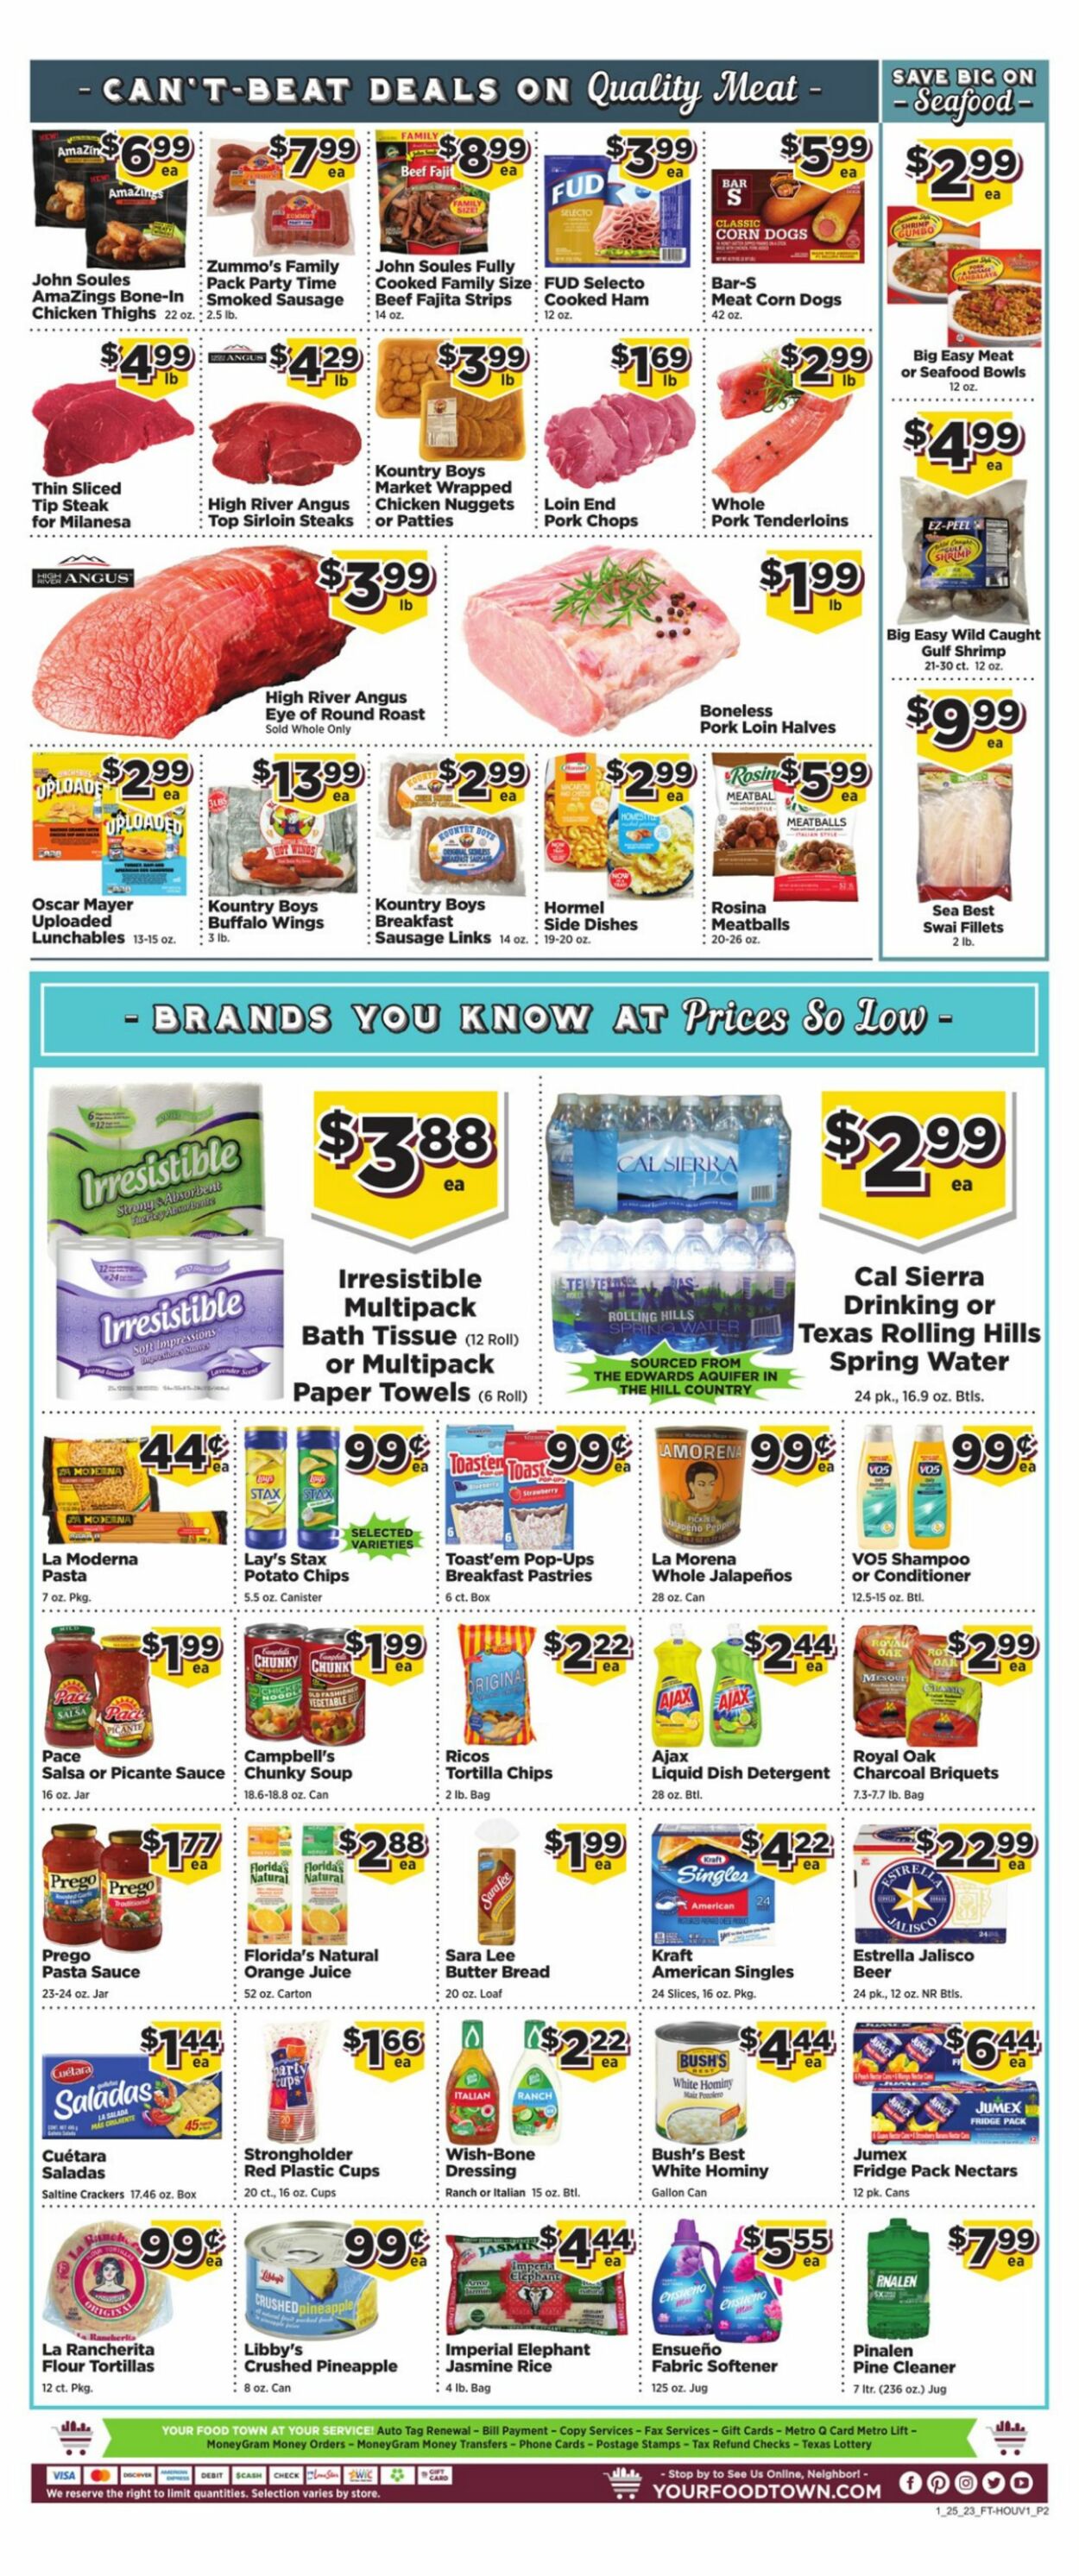 Catalogue Food Town from 01/25/2023